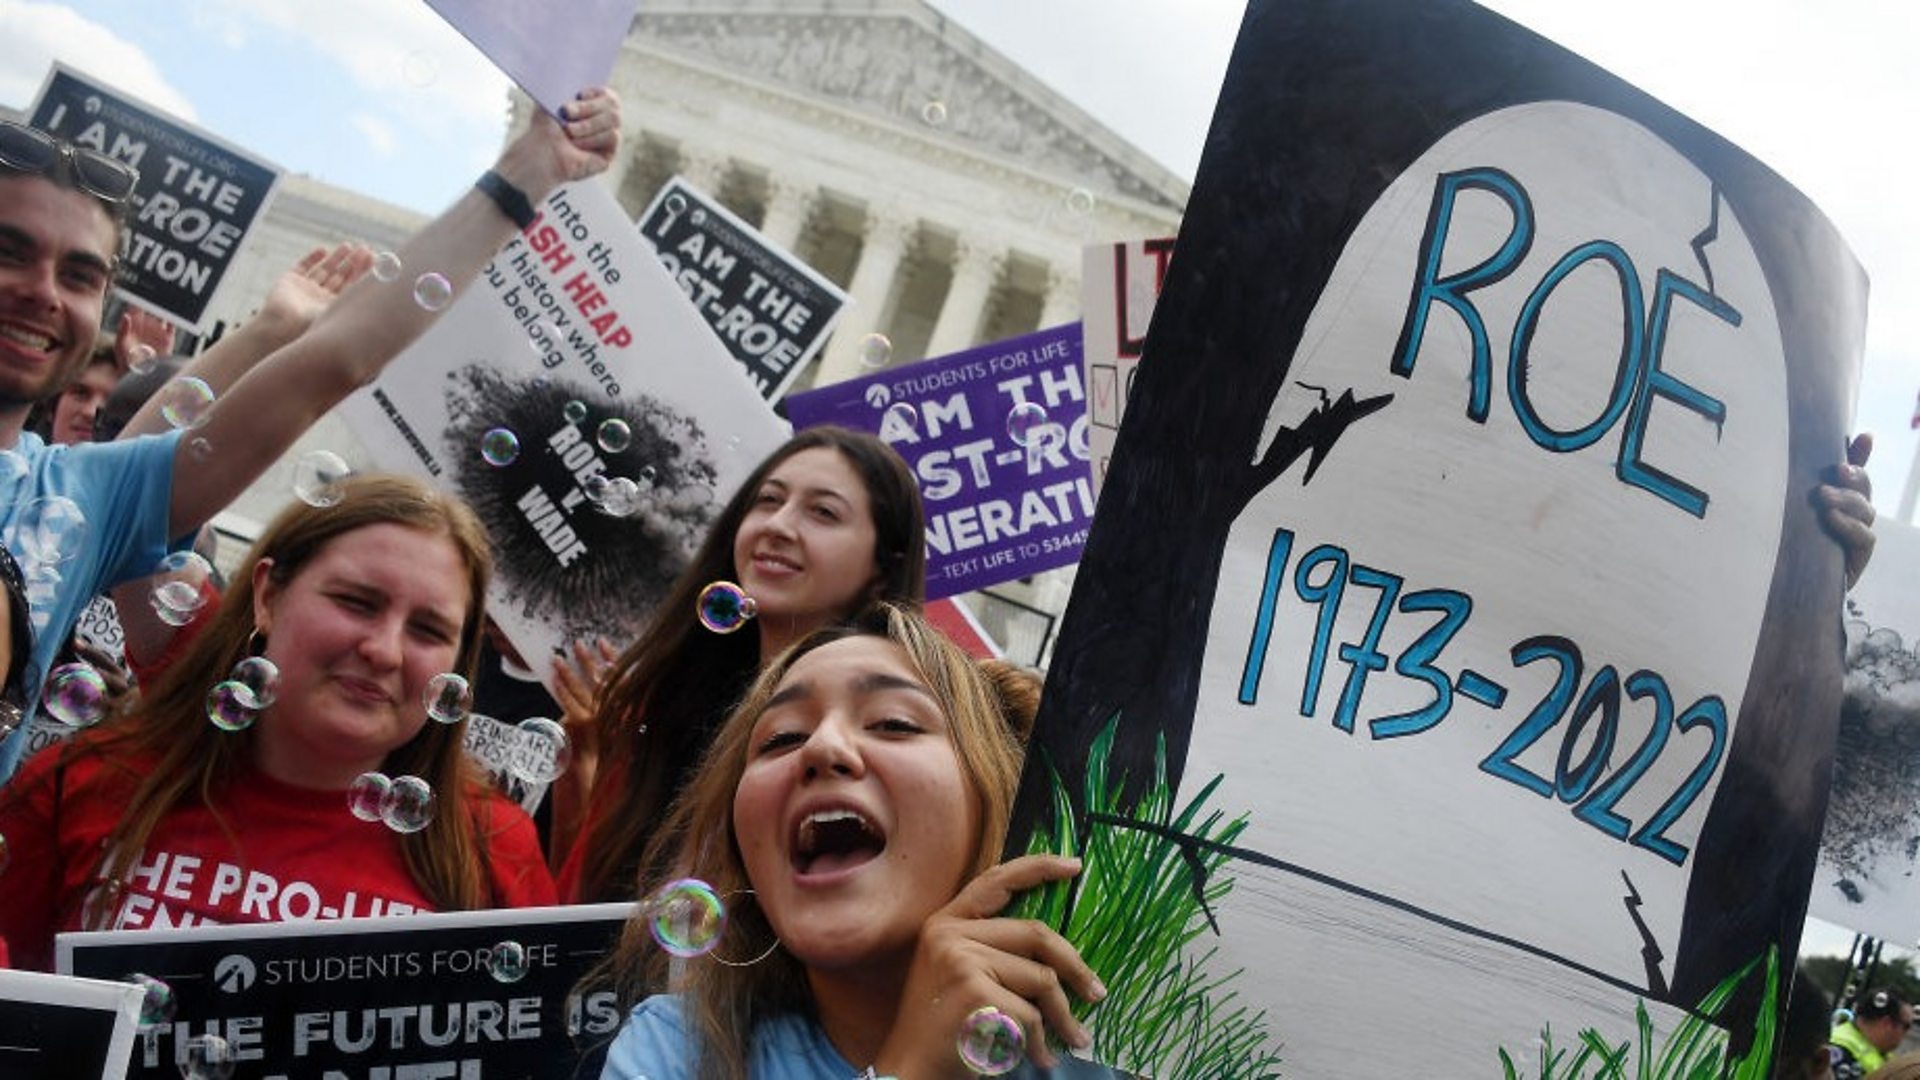 The moment Roe v Wade was overturned